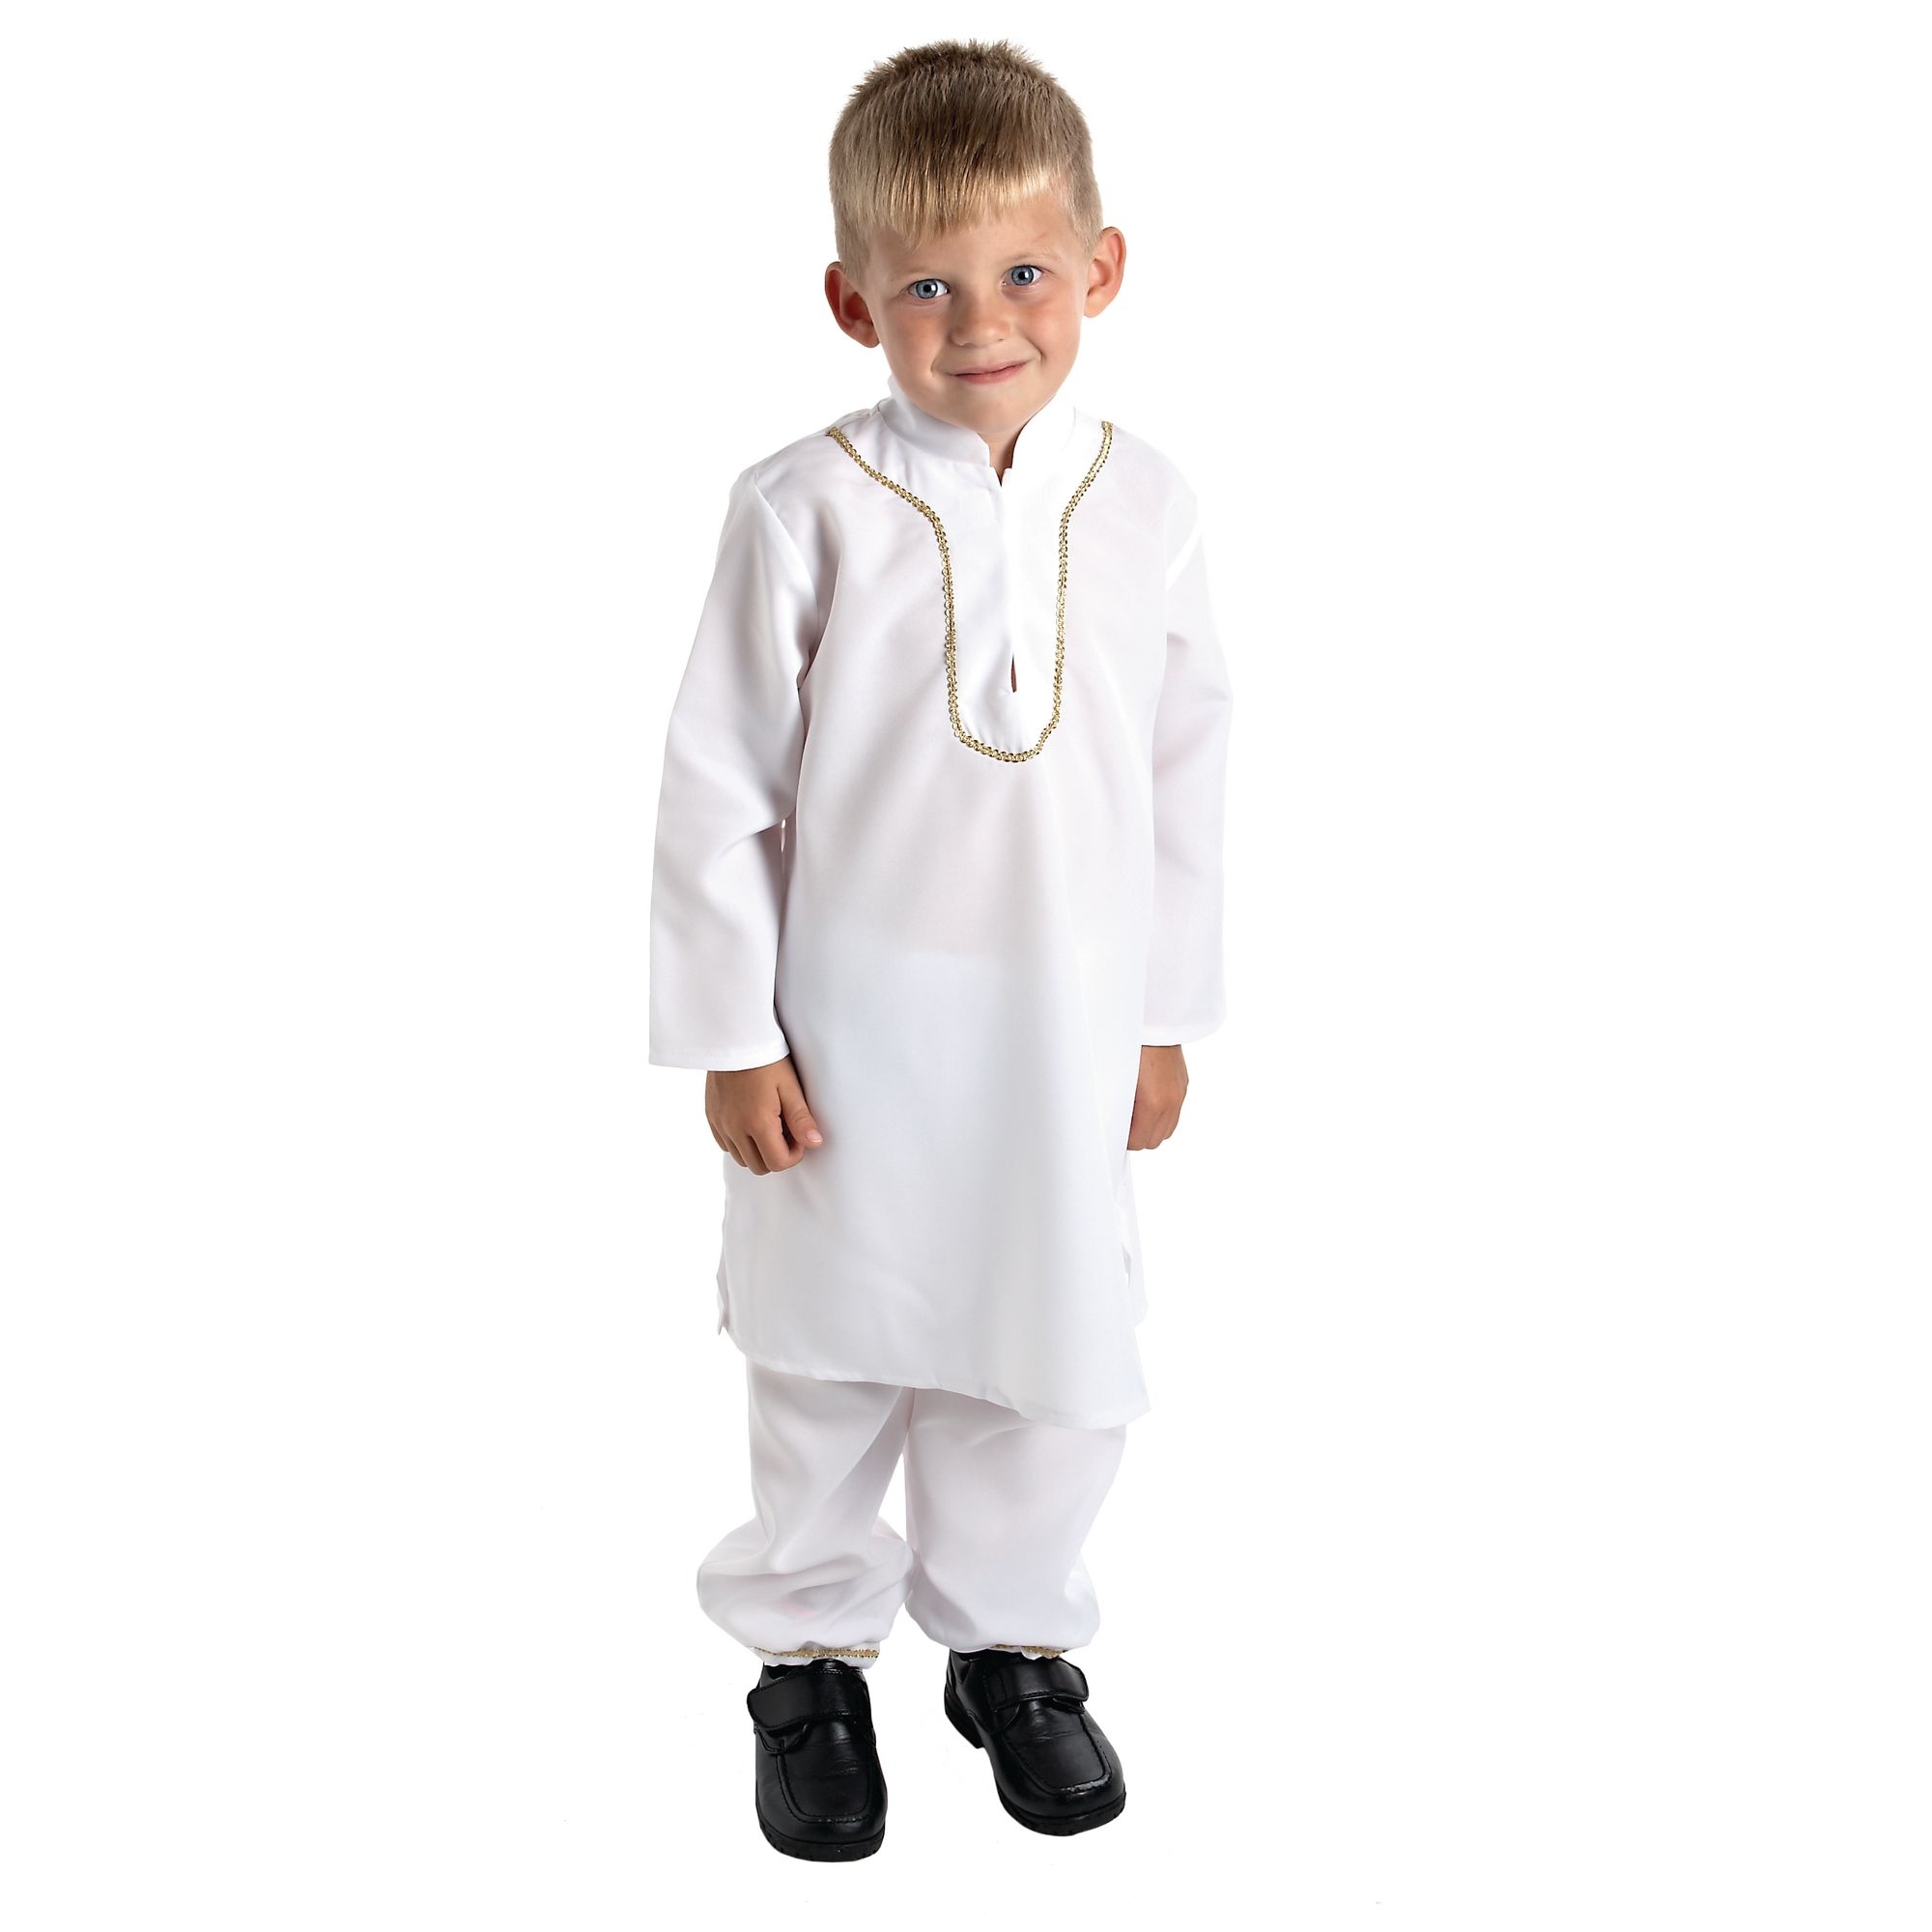 Multicultural Costumes - Indian Boy - 3-5 Years